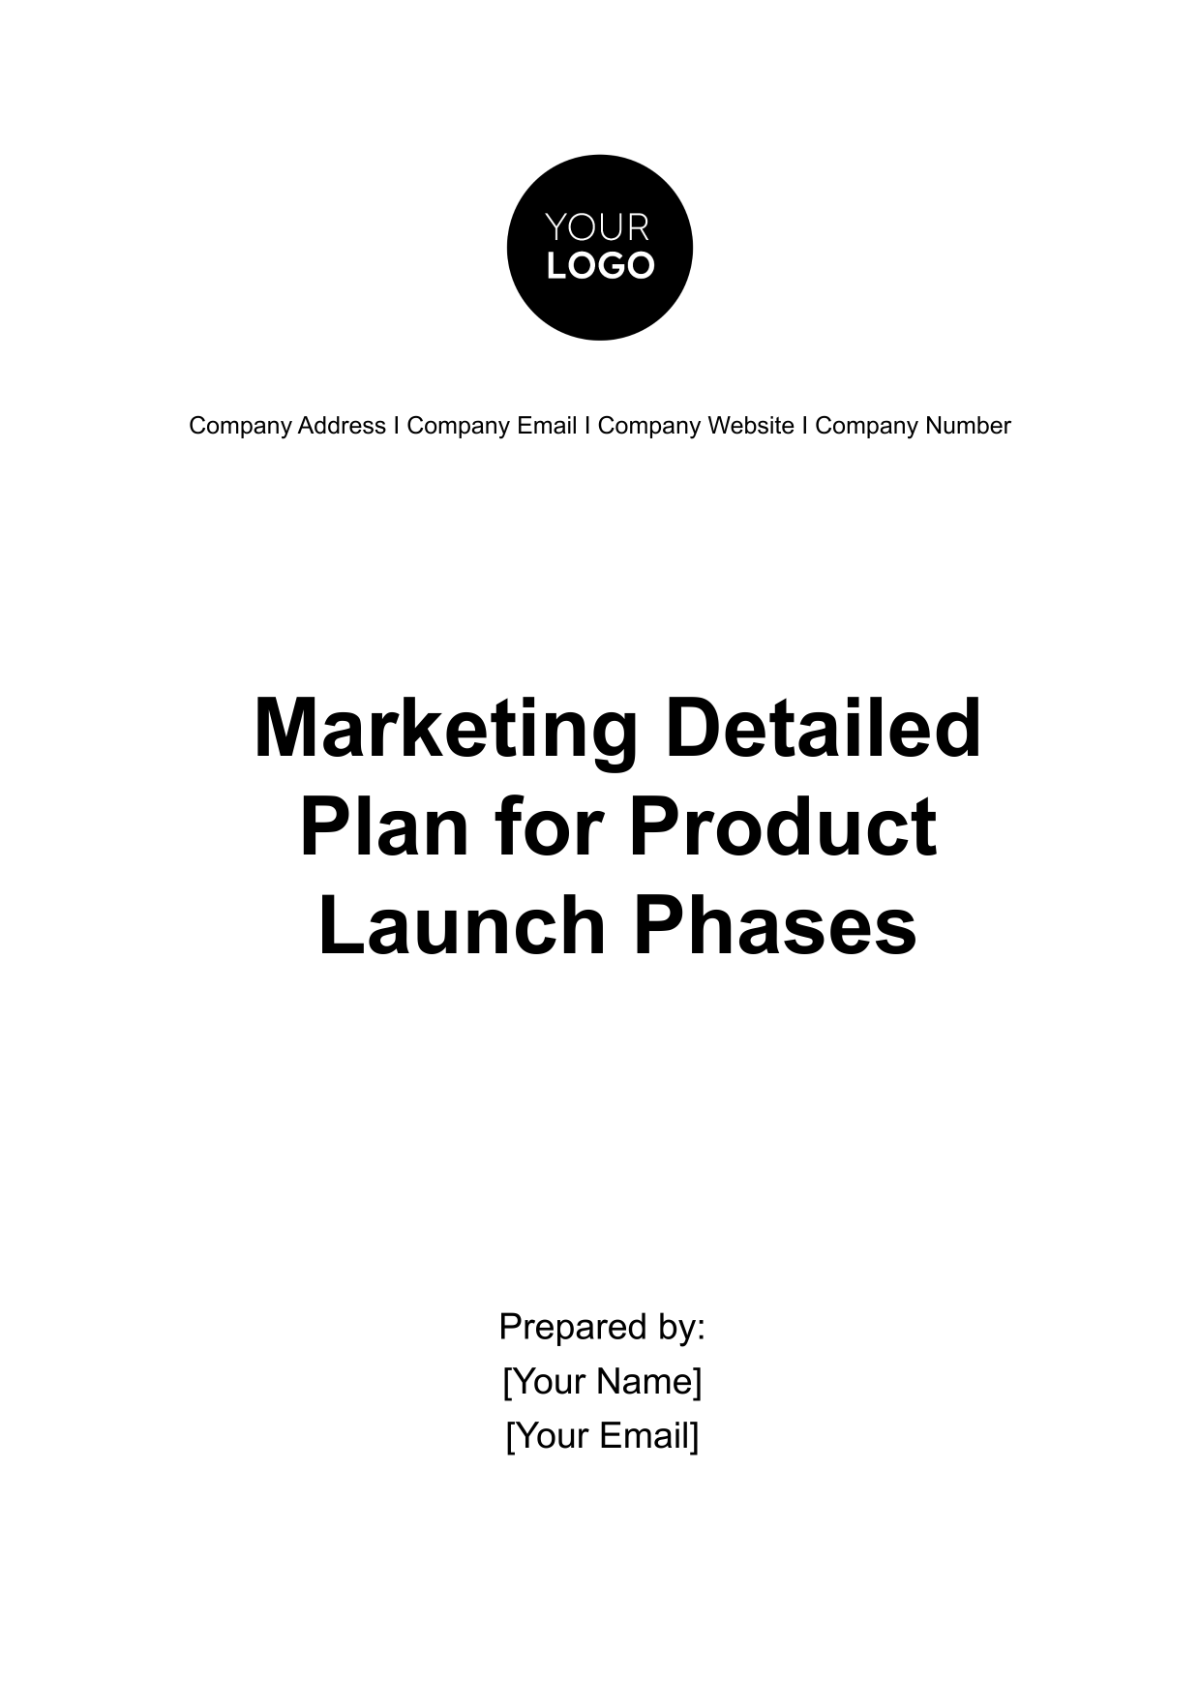 Marketing Detailed Plan for Product Launch Phases Template